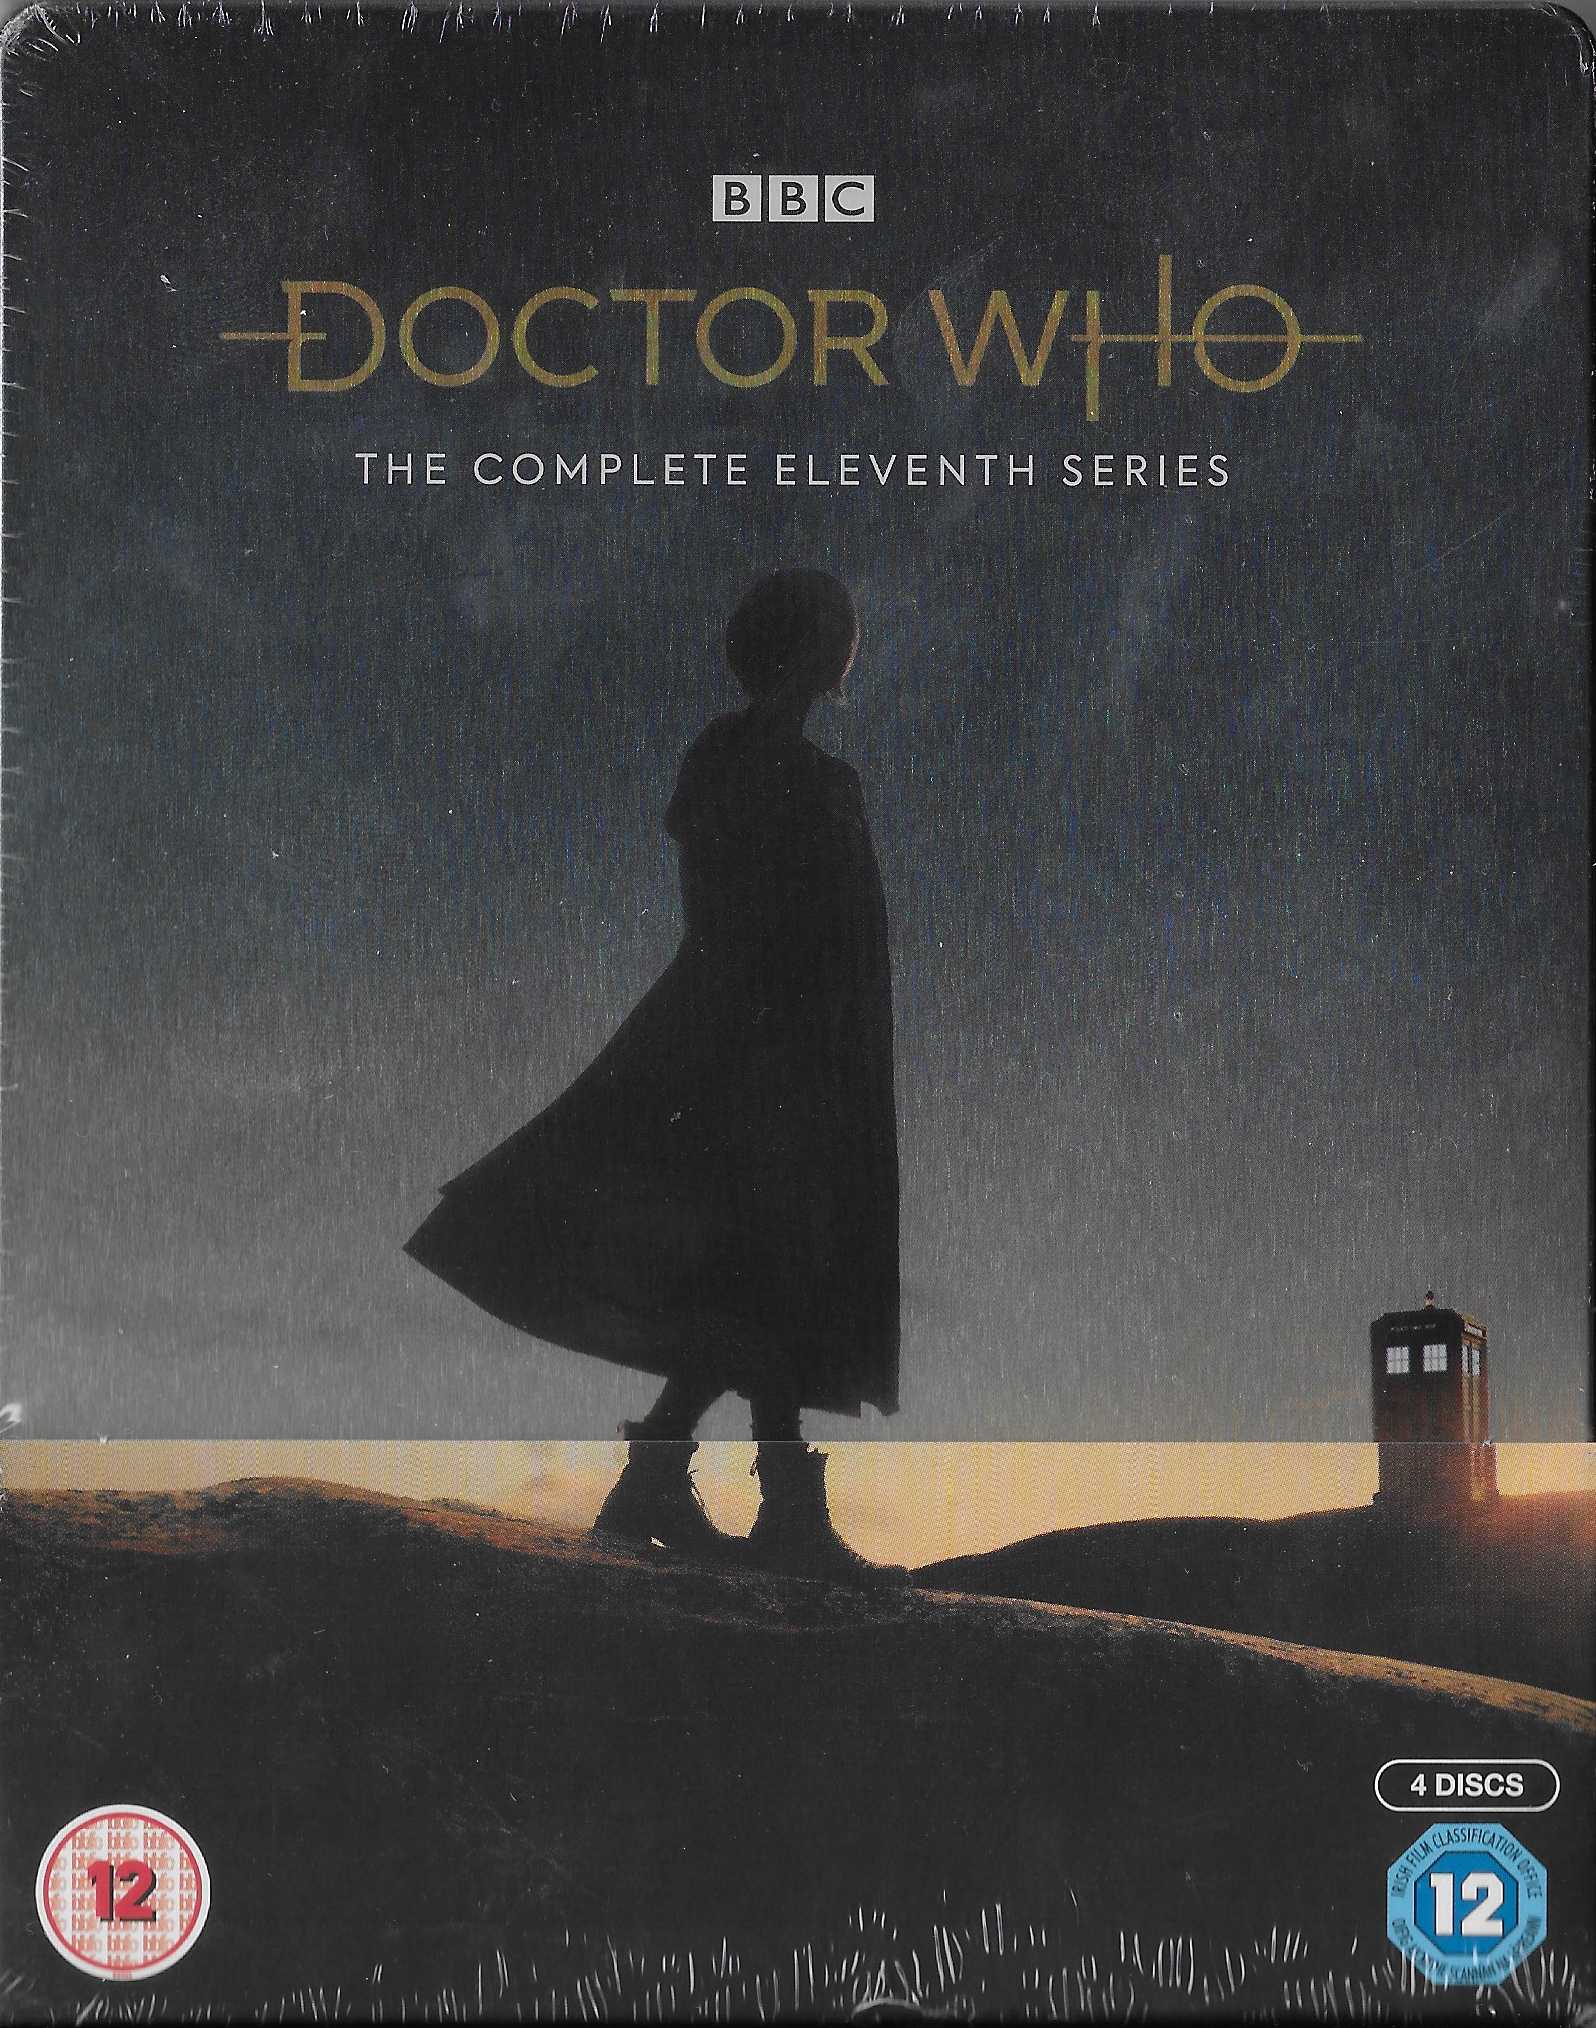 Picture of BBCBD 0455 Doctor Who - The complete series 11 by artist Various from the BBC blu-rays - Records and Tapes library